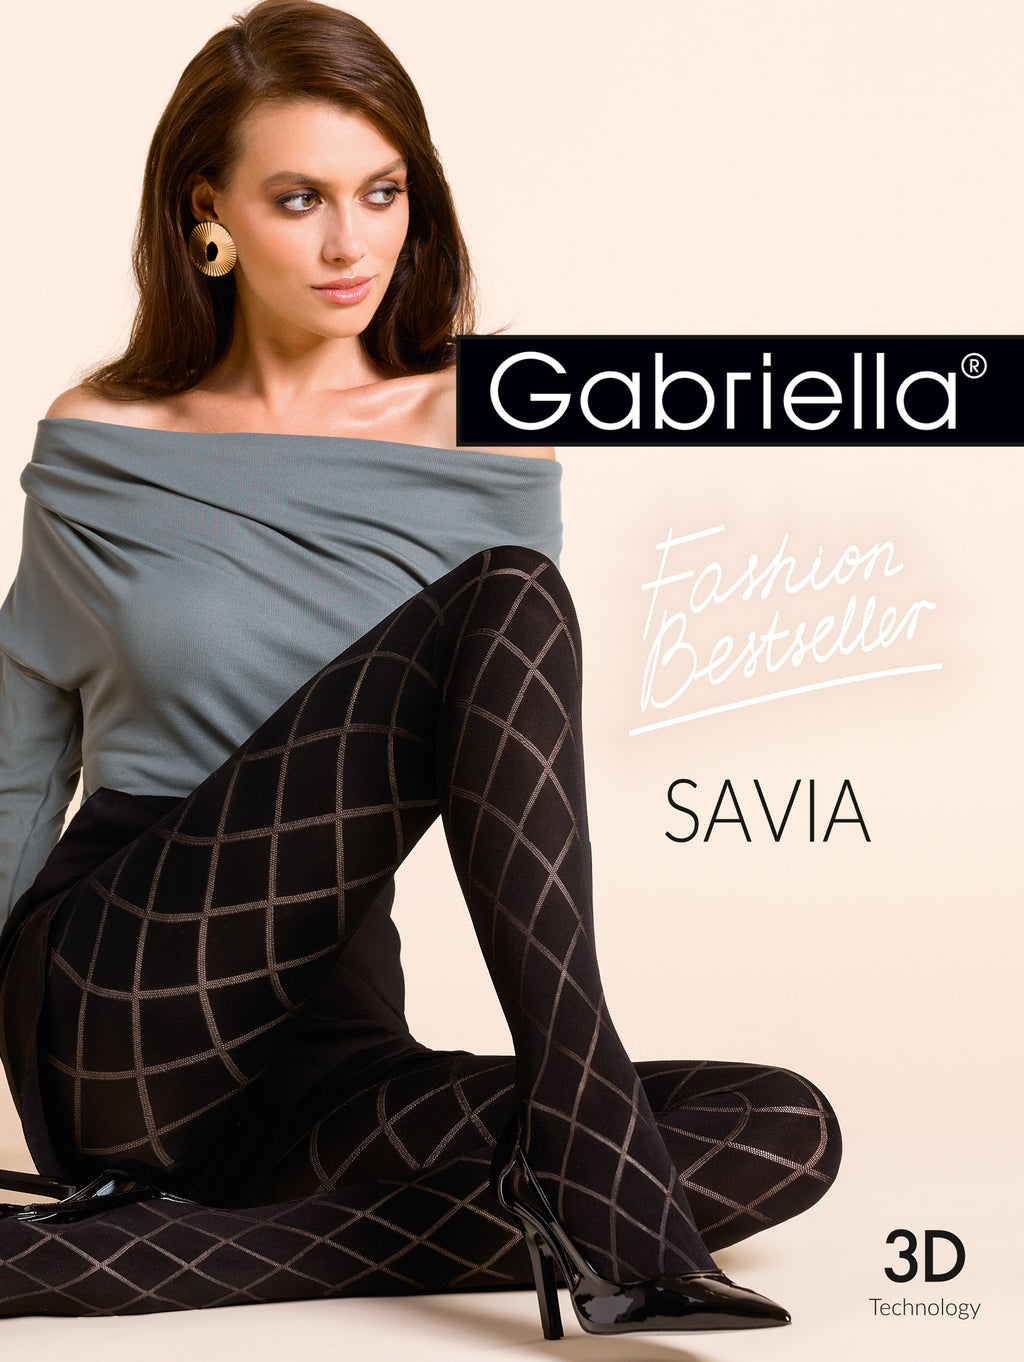 patterned, microfibre tights produced